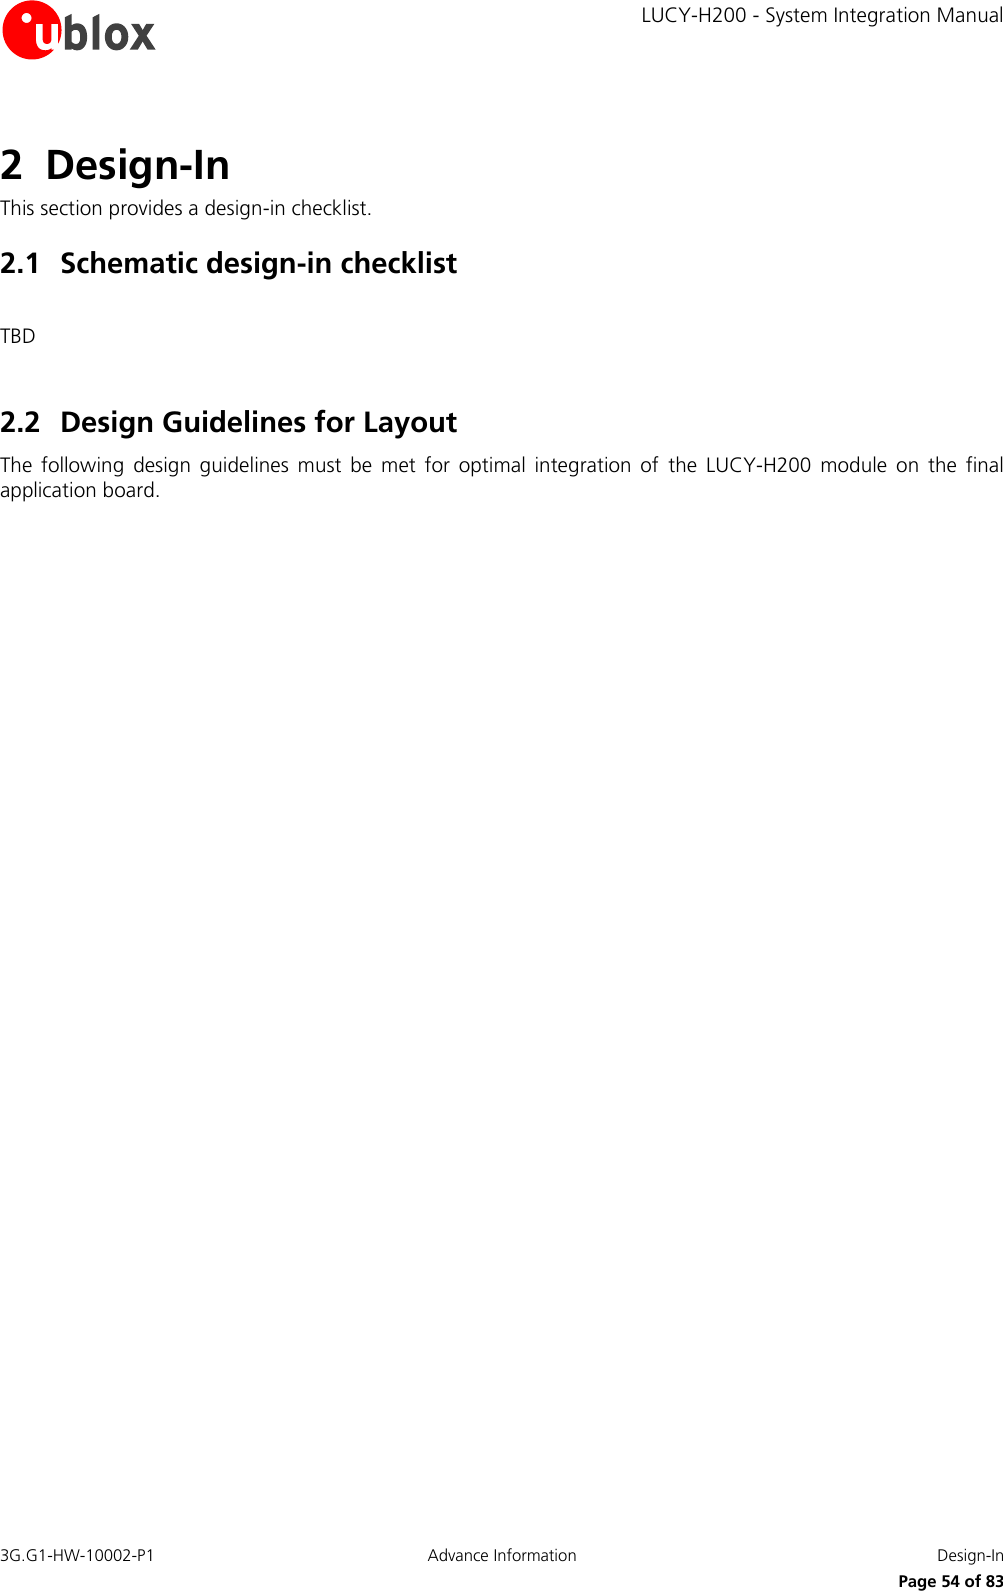     LUCY-H200 - System Integration Manual 3G.G1-HW-10002-P1  Advance Information  Design-In      Page 54 of 83 2 Design-In This section provides a design-in checklist. 2.1 Schematic design-in checklist  TBD  2.2 Design Guidelines for Layout The  following  design  guidelines  must  be  met  for  optimal  integration  of  the  LUCY-H200  module  on  the  final application board.    